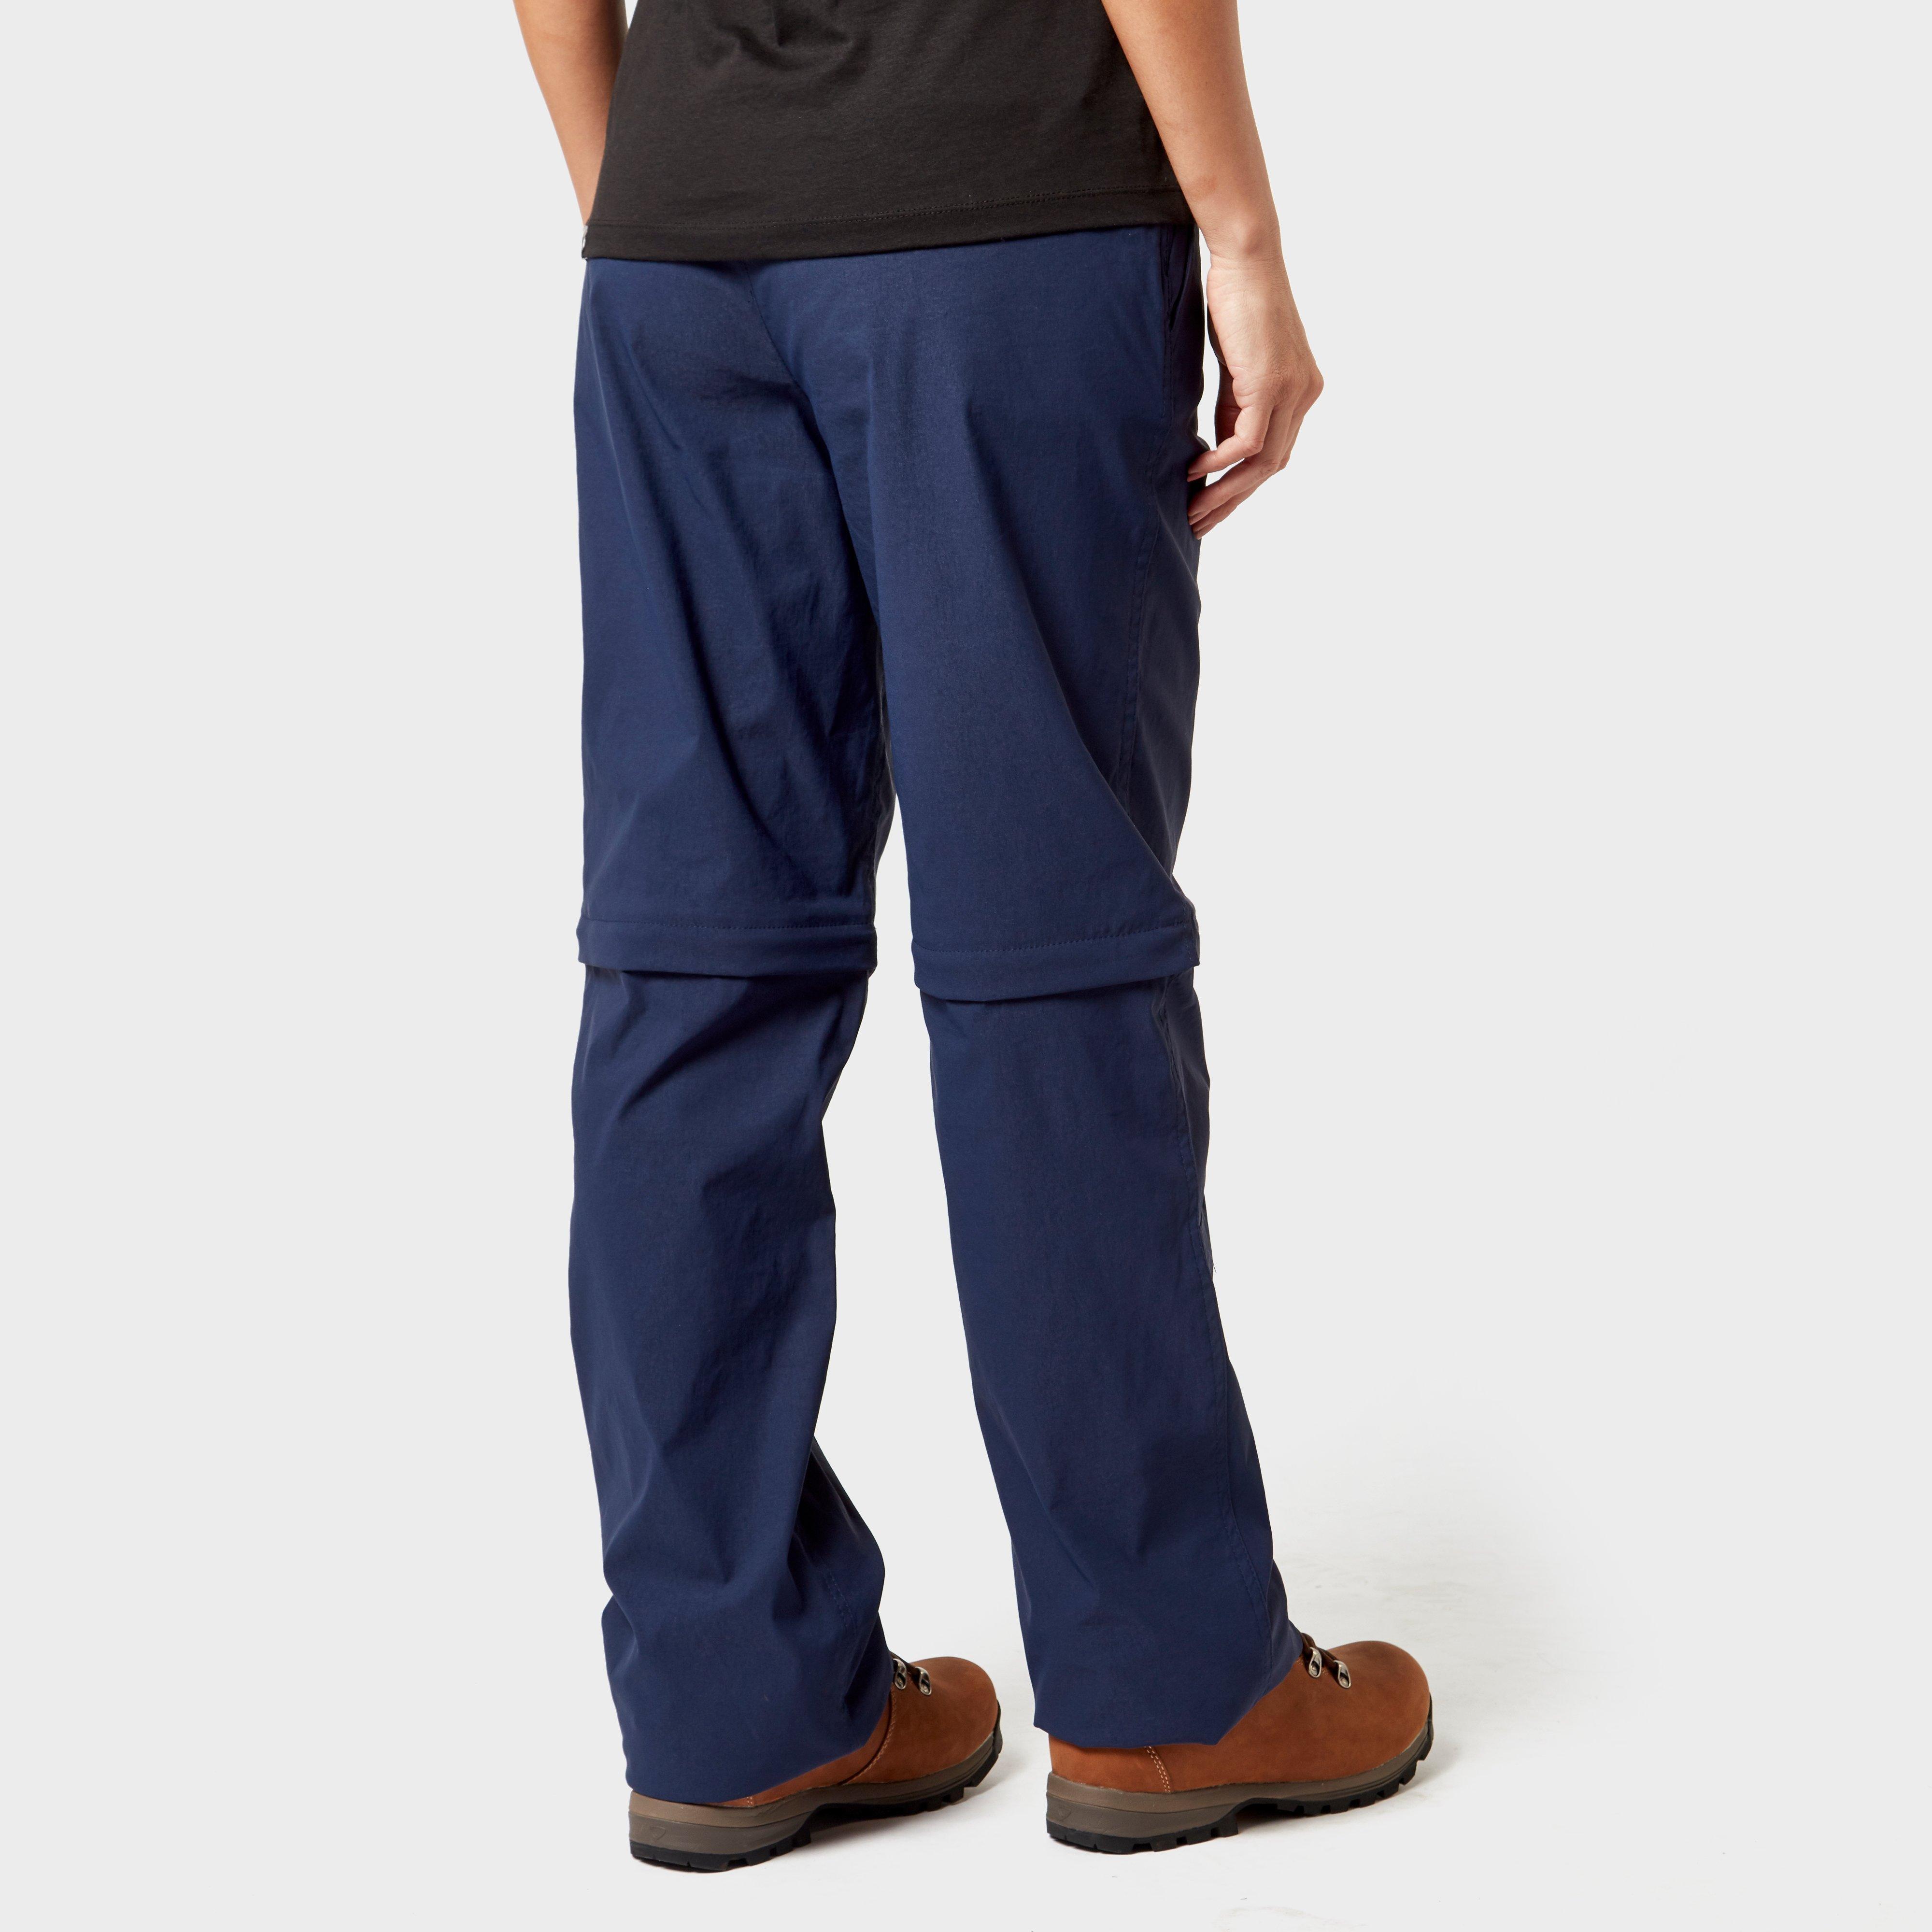 Brasher Women's Zip Off Stretch Trousers Review